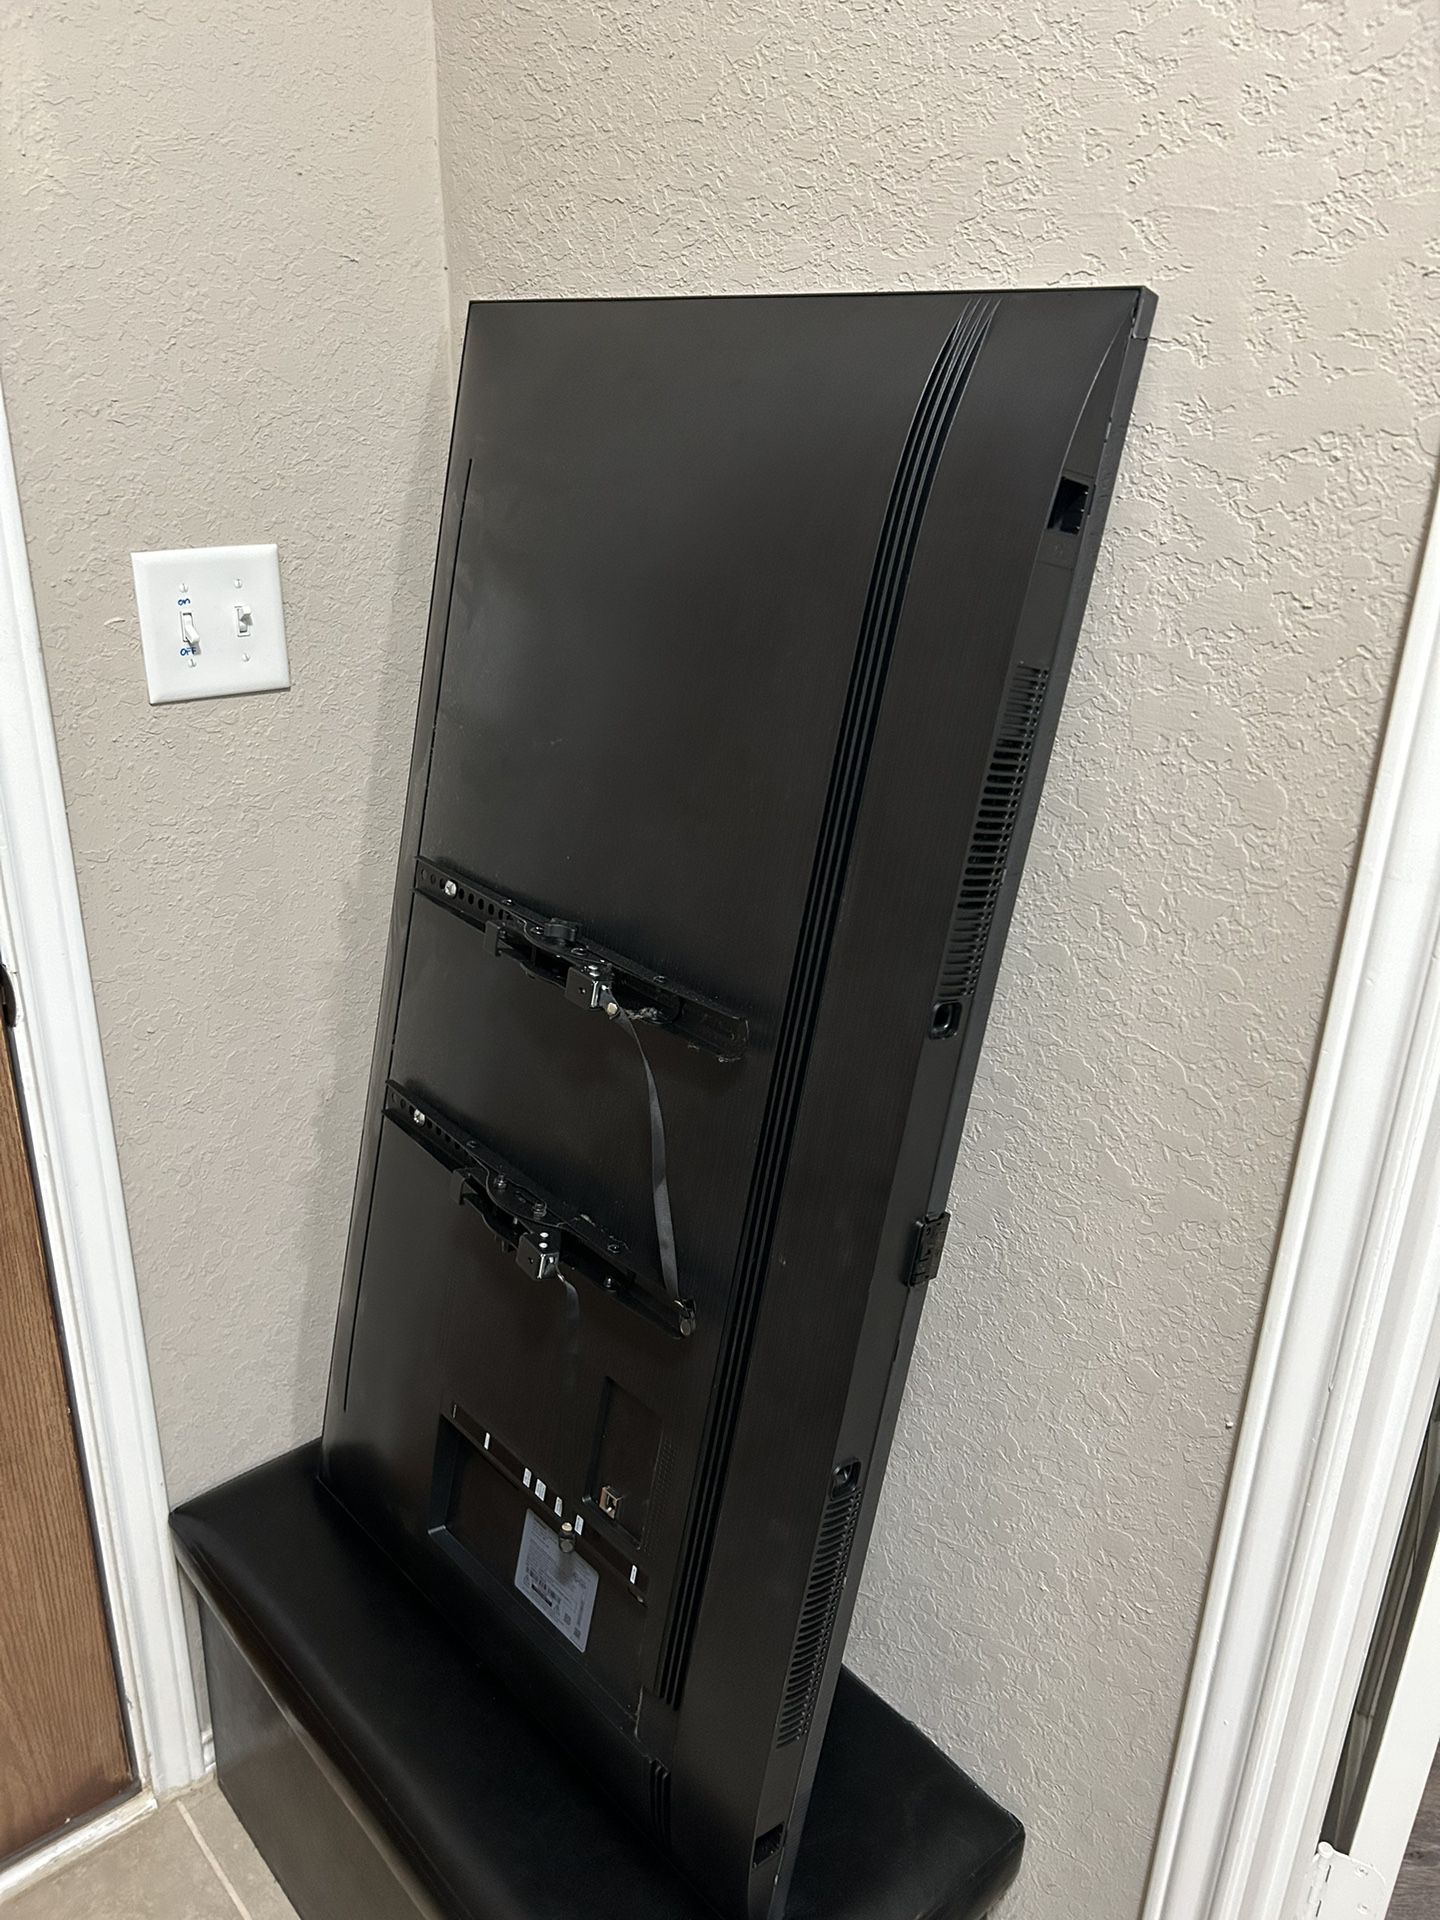 Samsung Tv 50 Inch With Complete Wall Mount